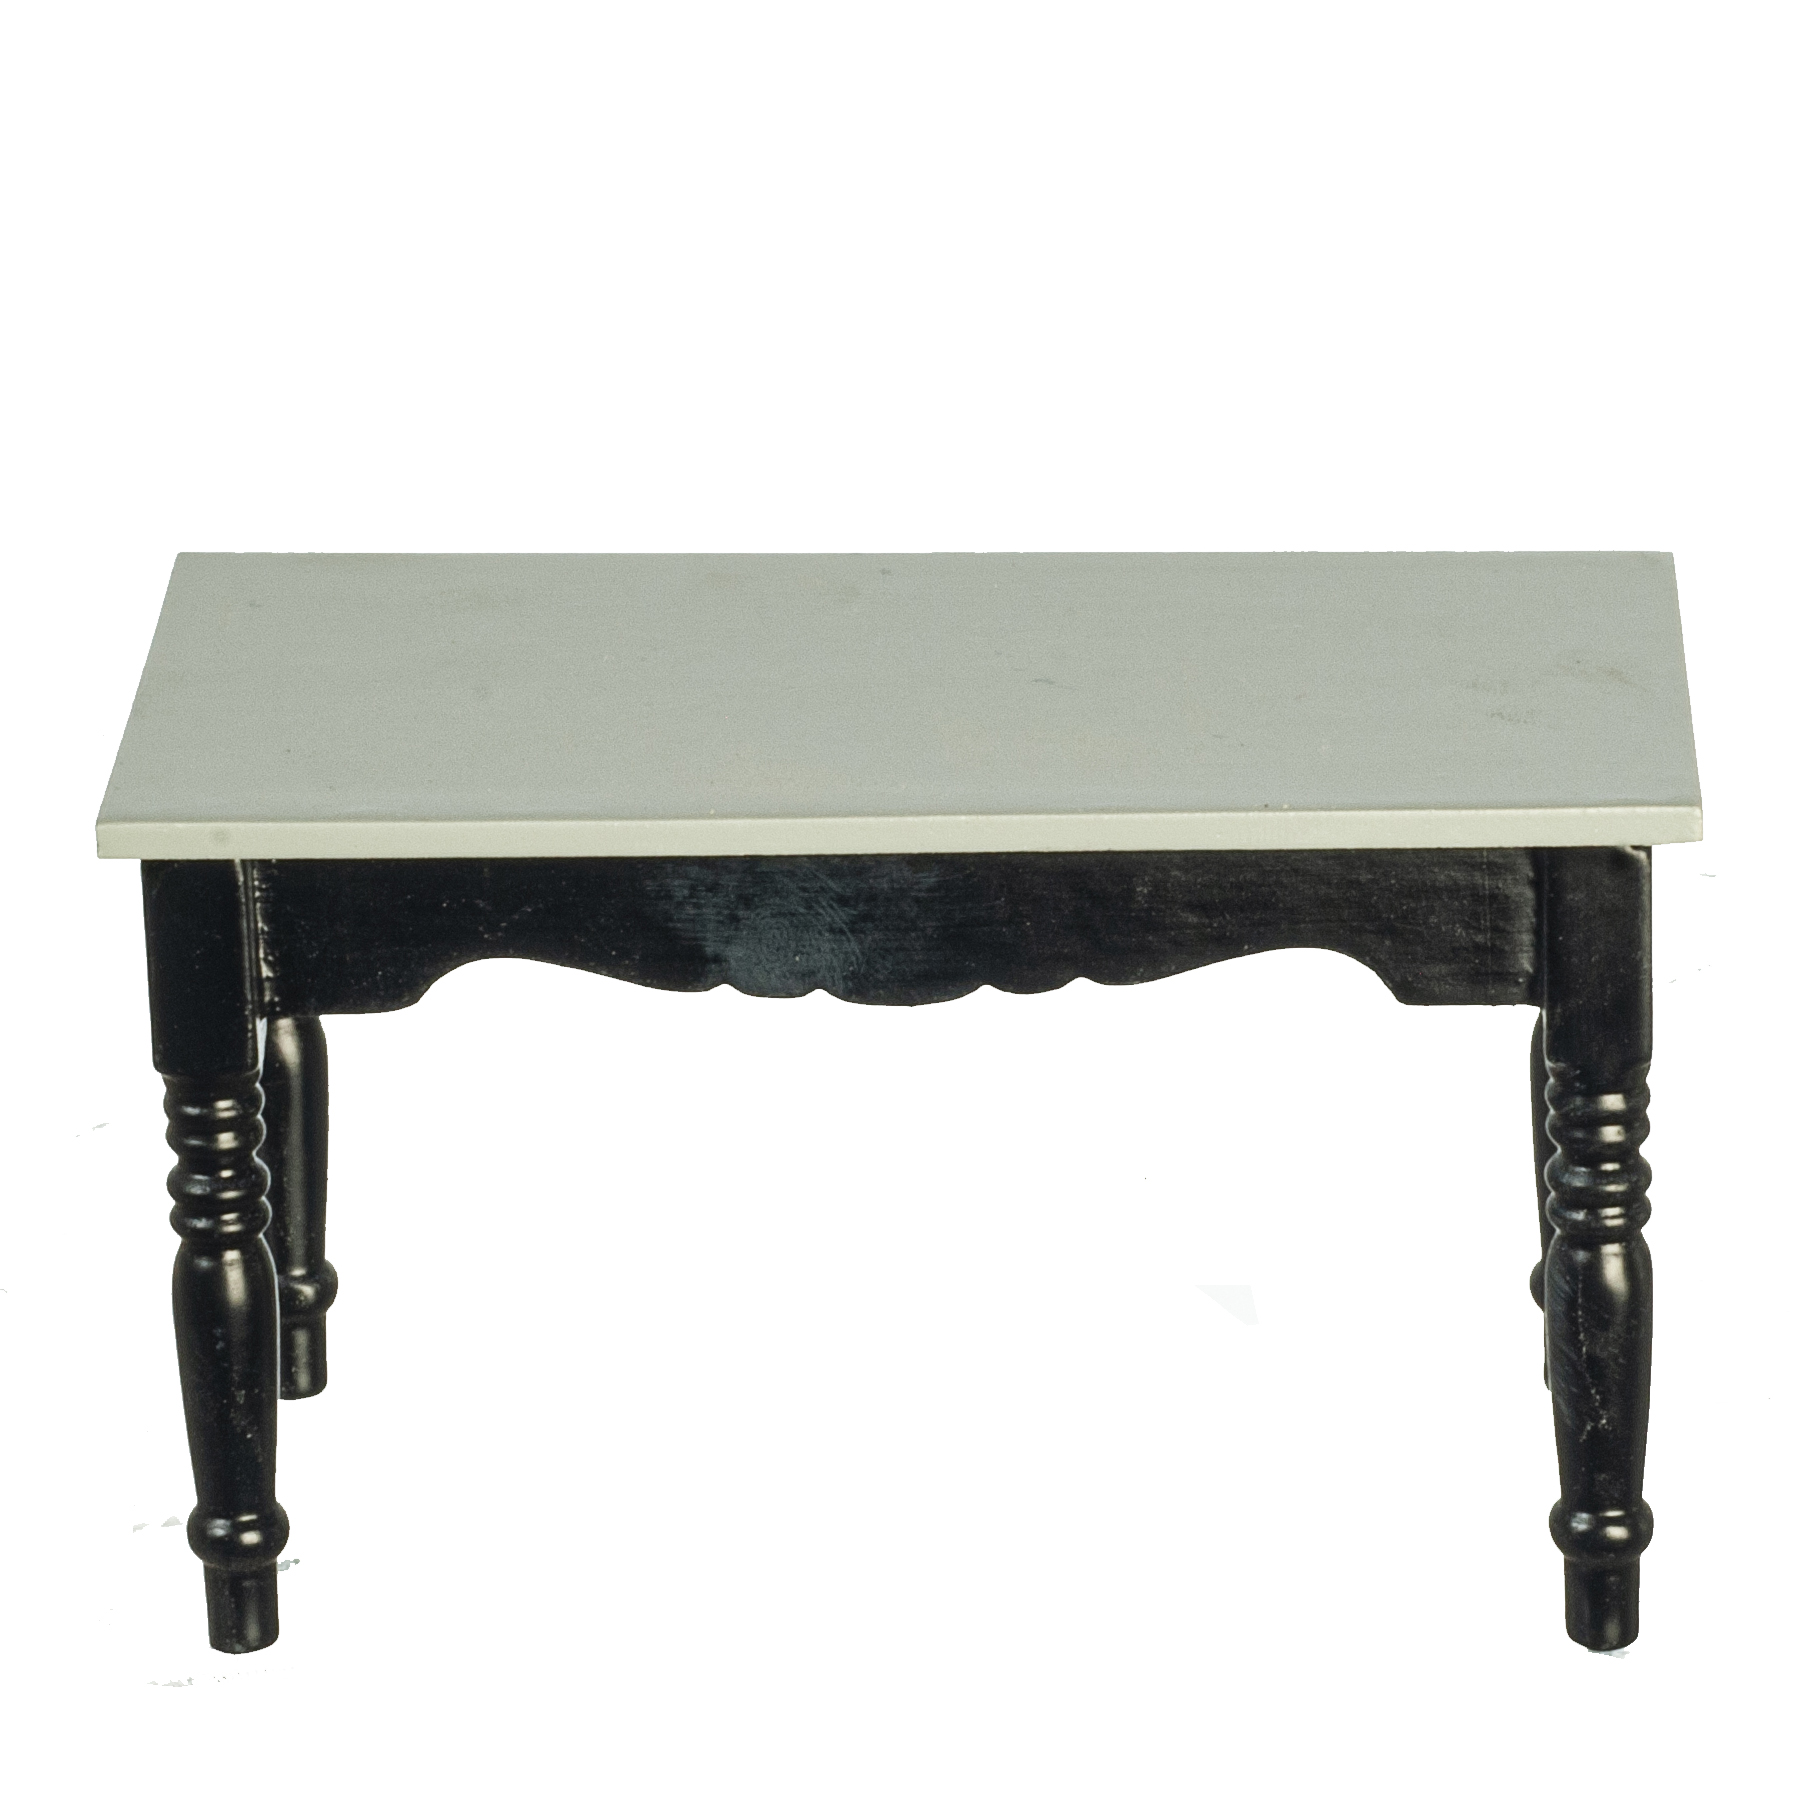 RS Table with Turned Legs Black and Grey